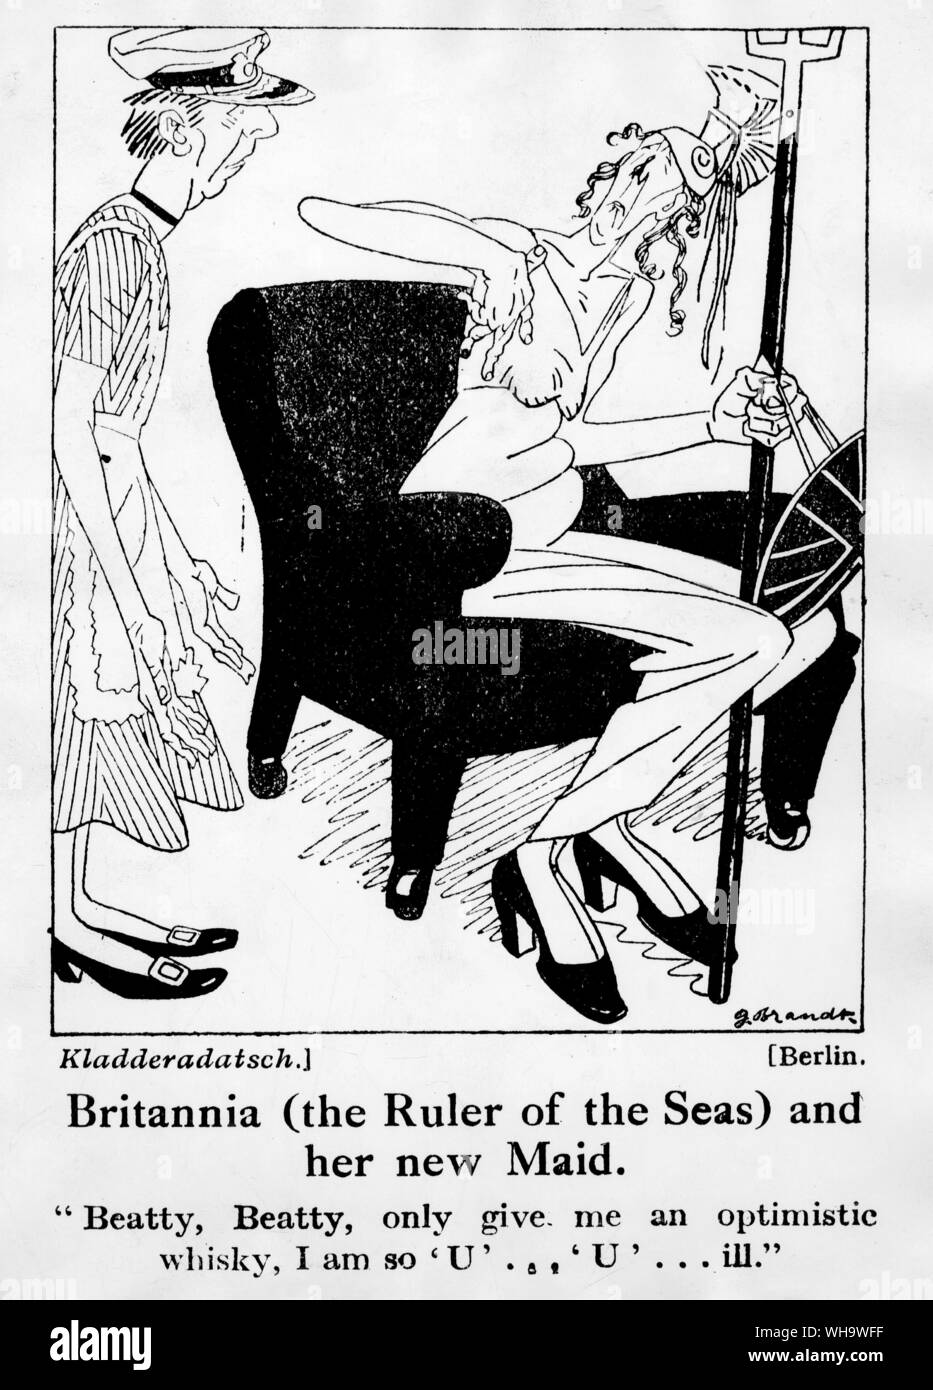 WW1/ 'Britannia (the Ruler of the seas) and her new maid.' German cartoon from Berlin. Admiral Beatty featured. Stock Photo